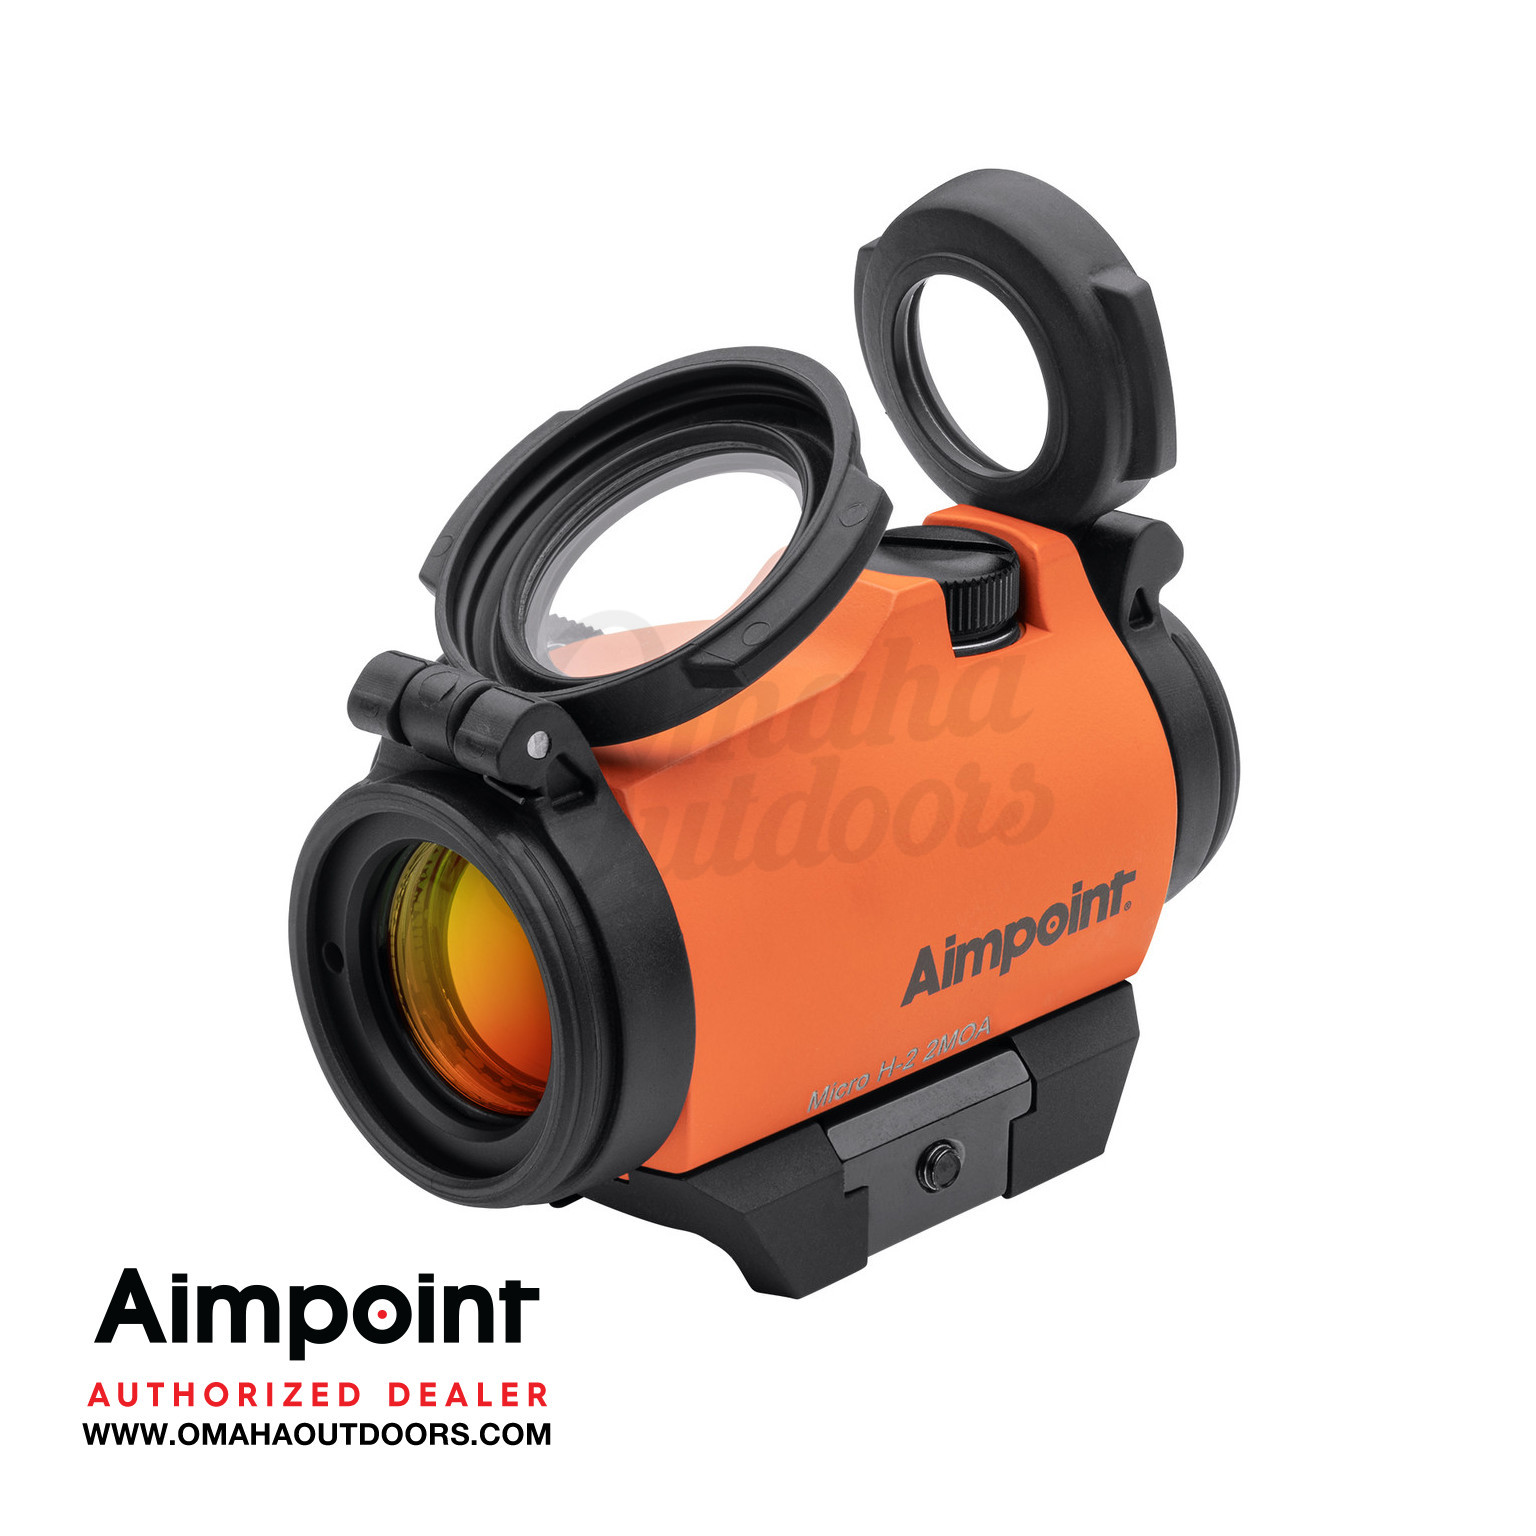 Aimpoint Micro H-2 Red Dot Reflex Sight with Standard Mount - 2 MOA -  200185 : Sports & Outdoors 